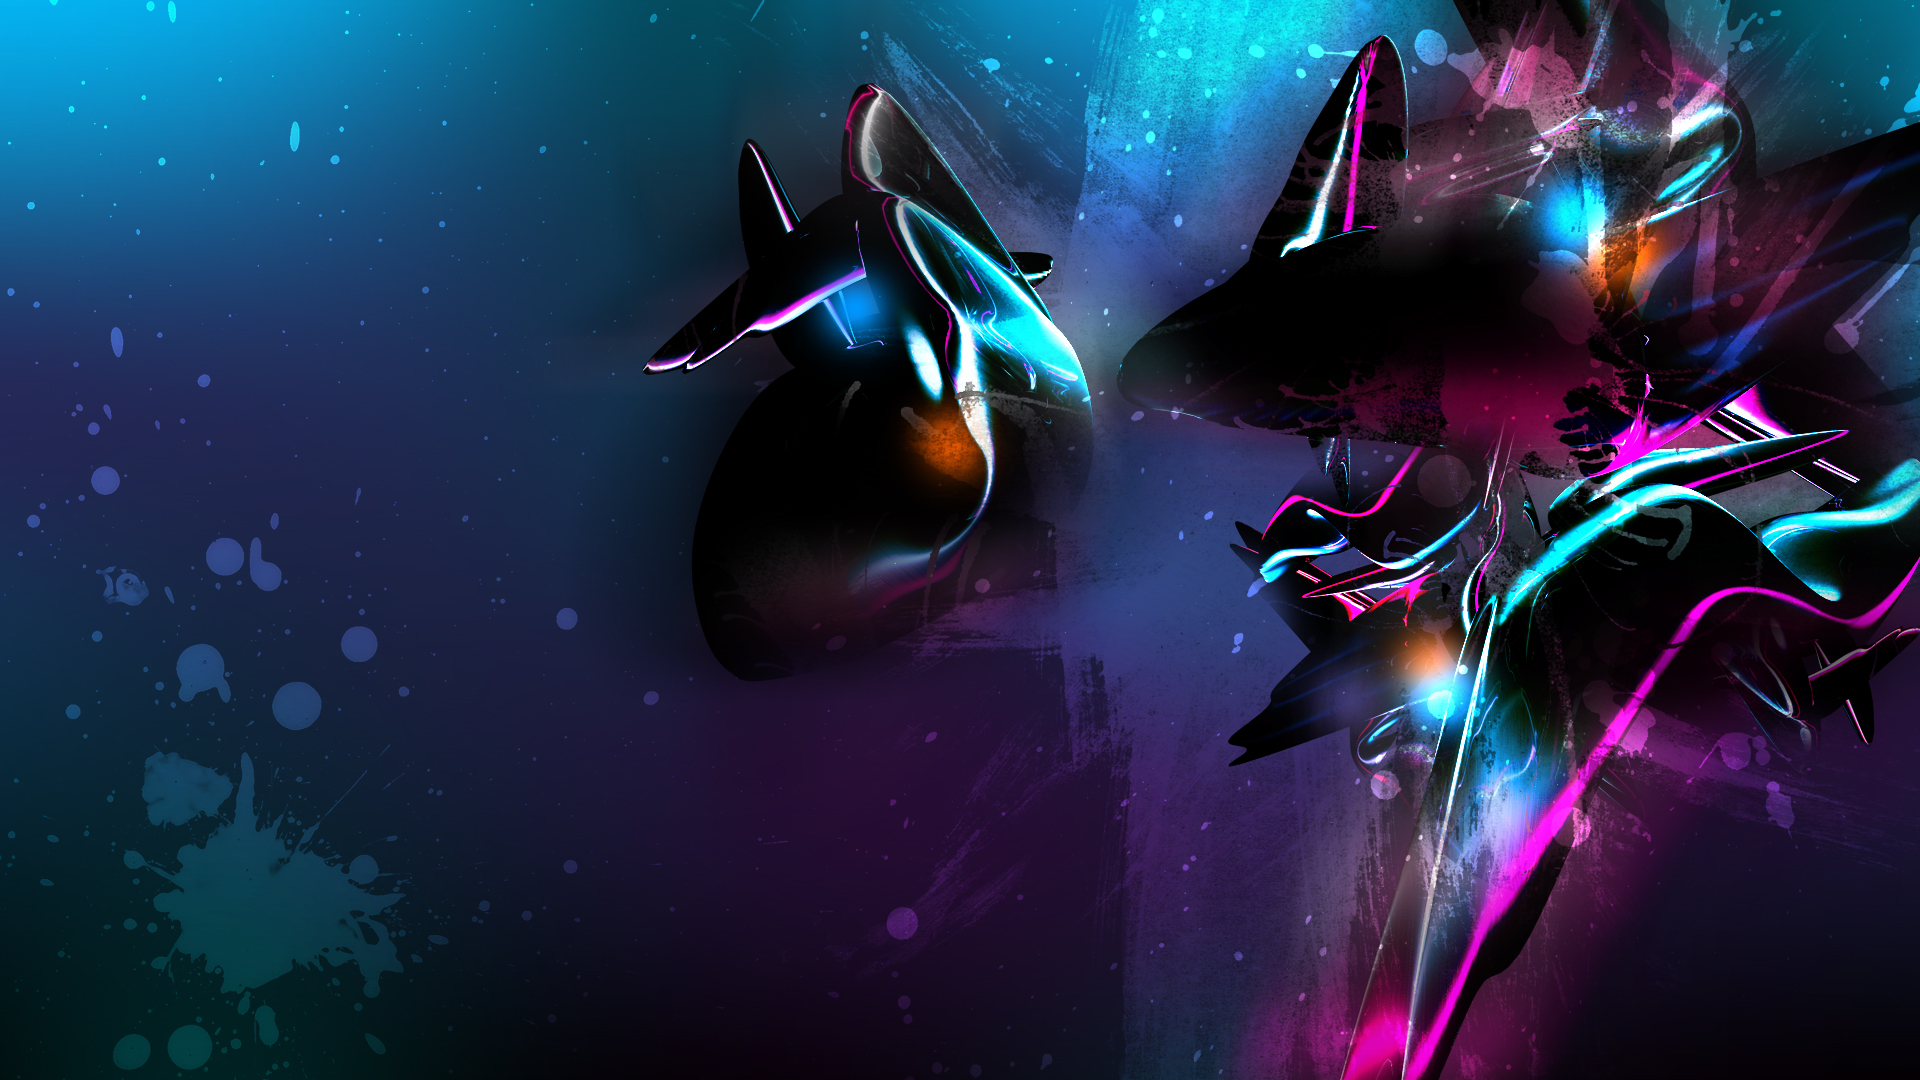 Hd Abstract Anime 720p Wallpaper 1080p 7737 Hd Wallpapers Background 1920x1080